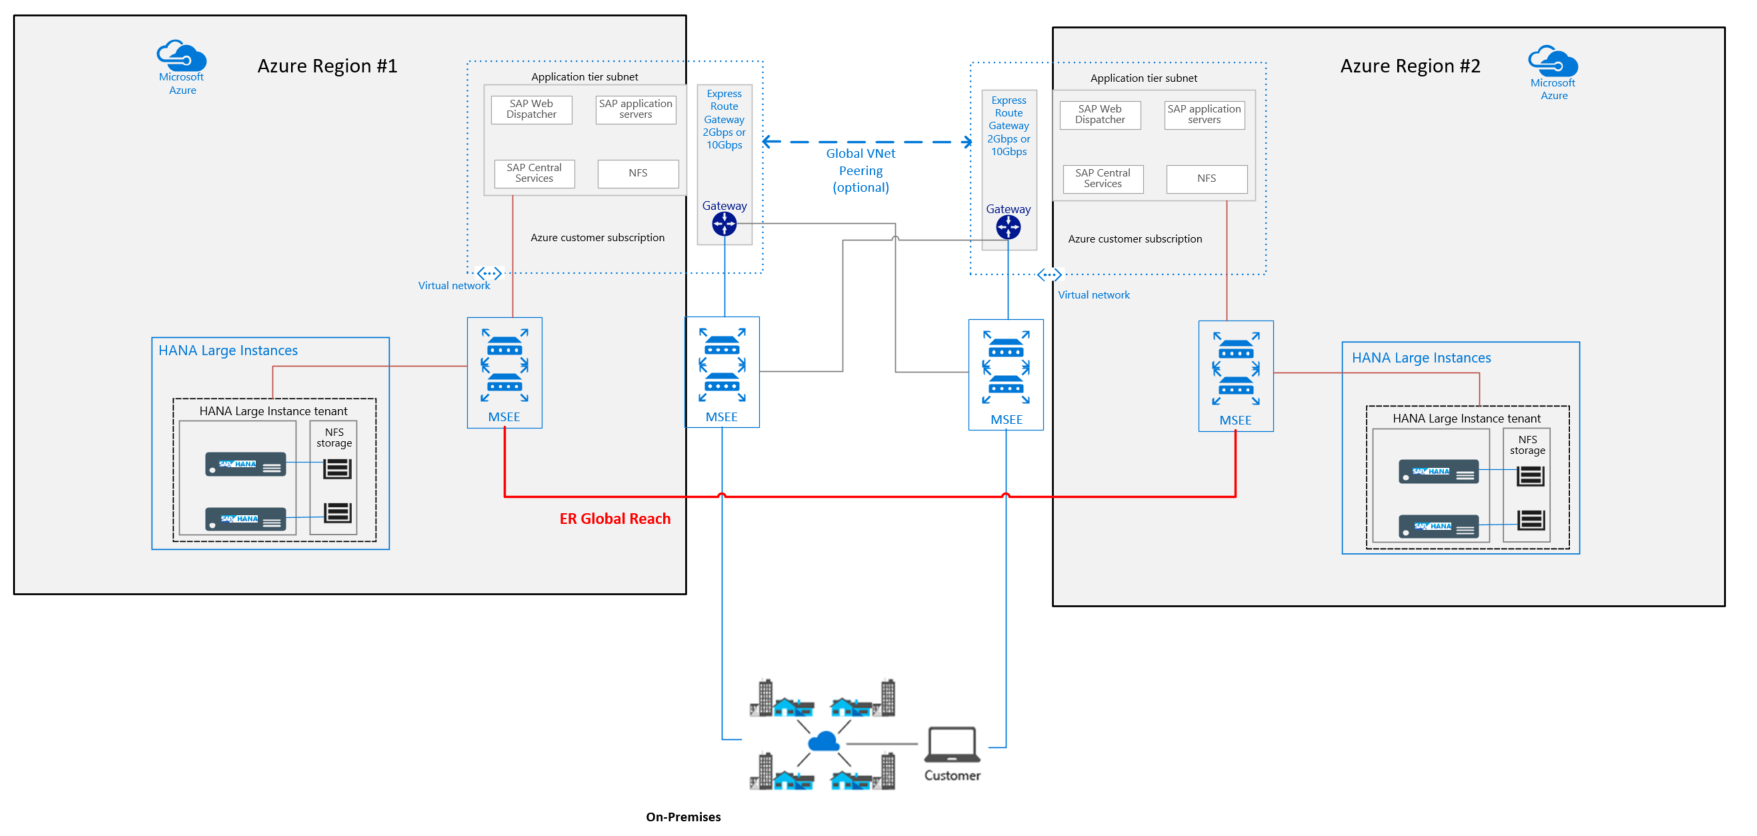 Virtual network connected to Azure Large Instance stamps in different Azure regions